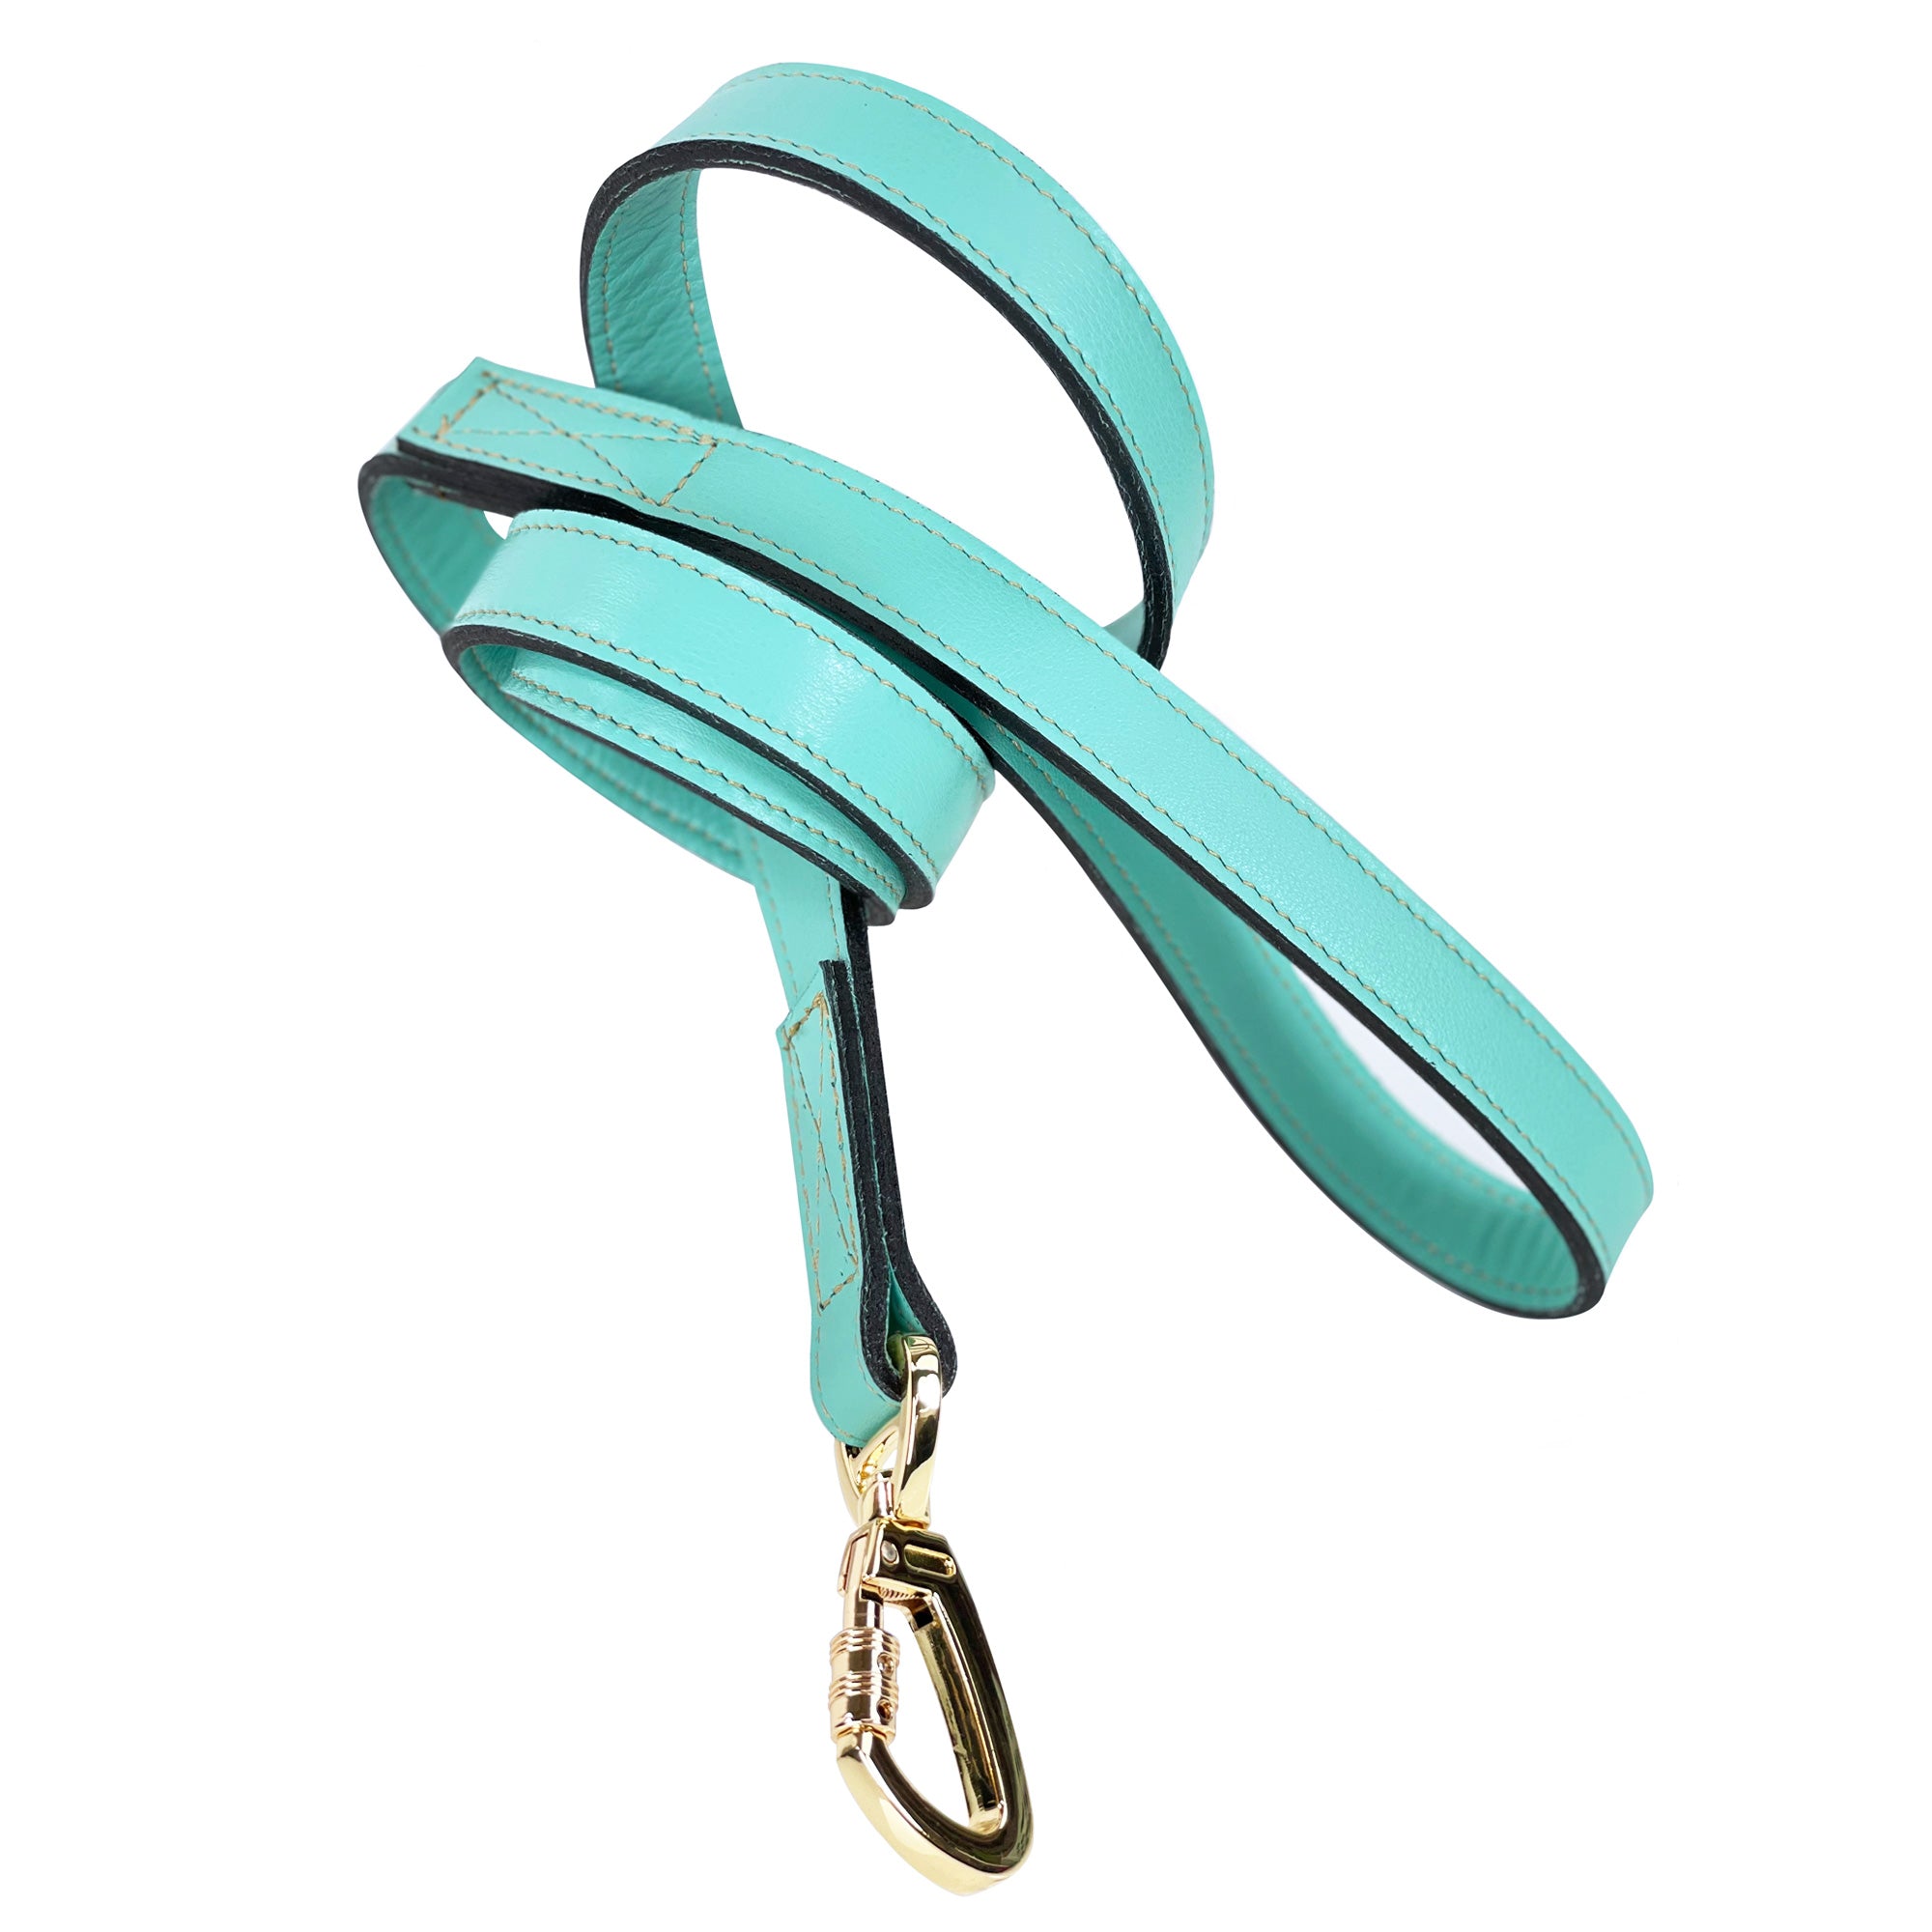 Hugs & Kisses Dog Leash in Turquoise & Gold